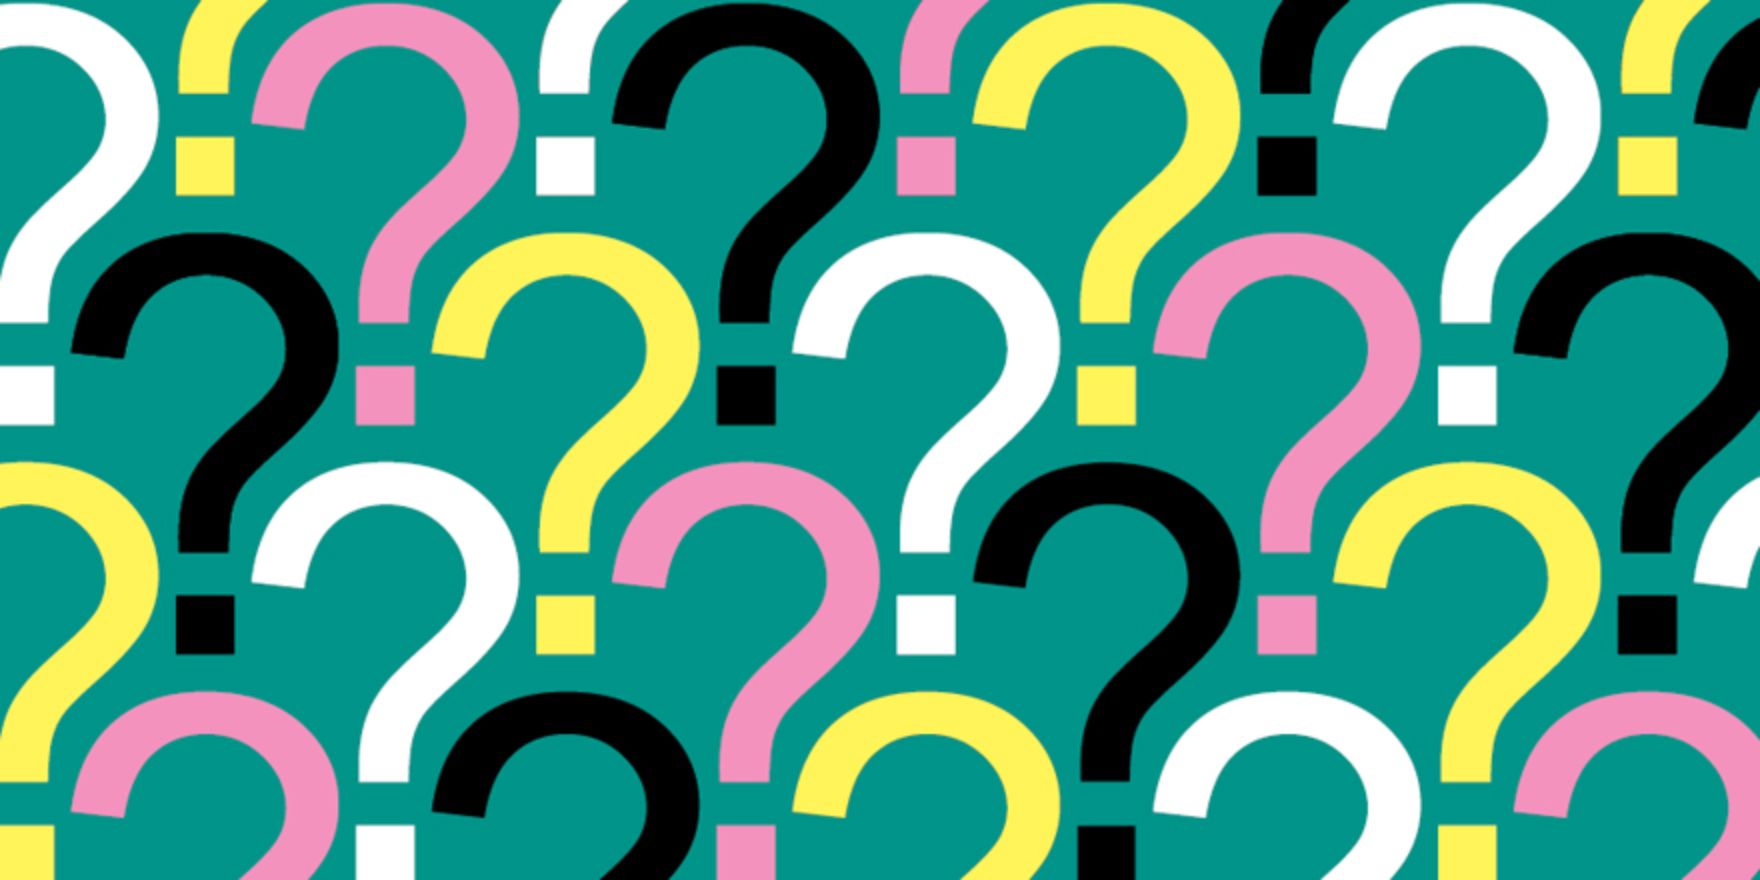 Burning Questions podcast logo featuring multi-coloured question marks against a teal background.